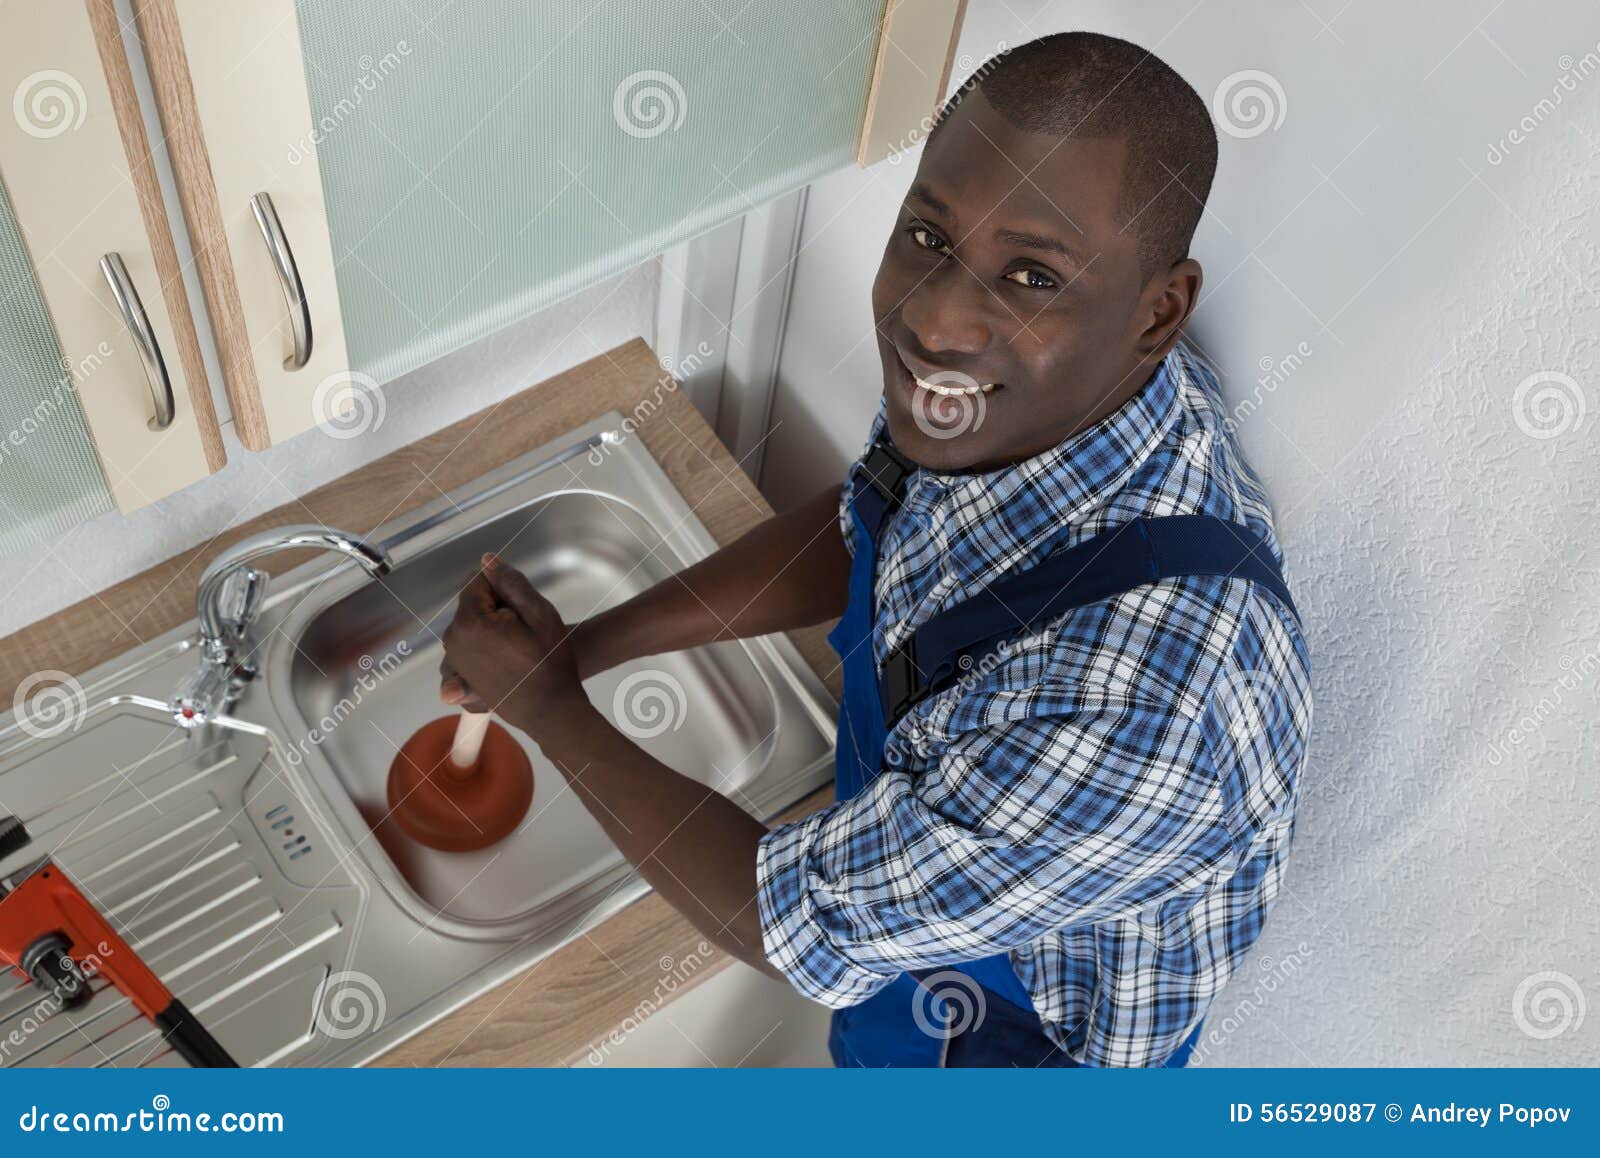 Happy Woman Looking At Male Plumber Using Plunger In The Kitchen Sink,  Stock Photo, Picture And Low Budget Royalty Free Image. Pic. ESY-048550729